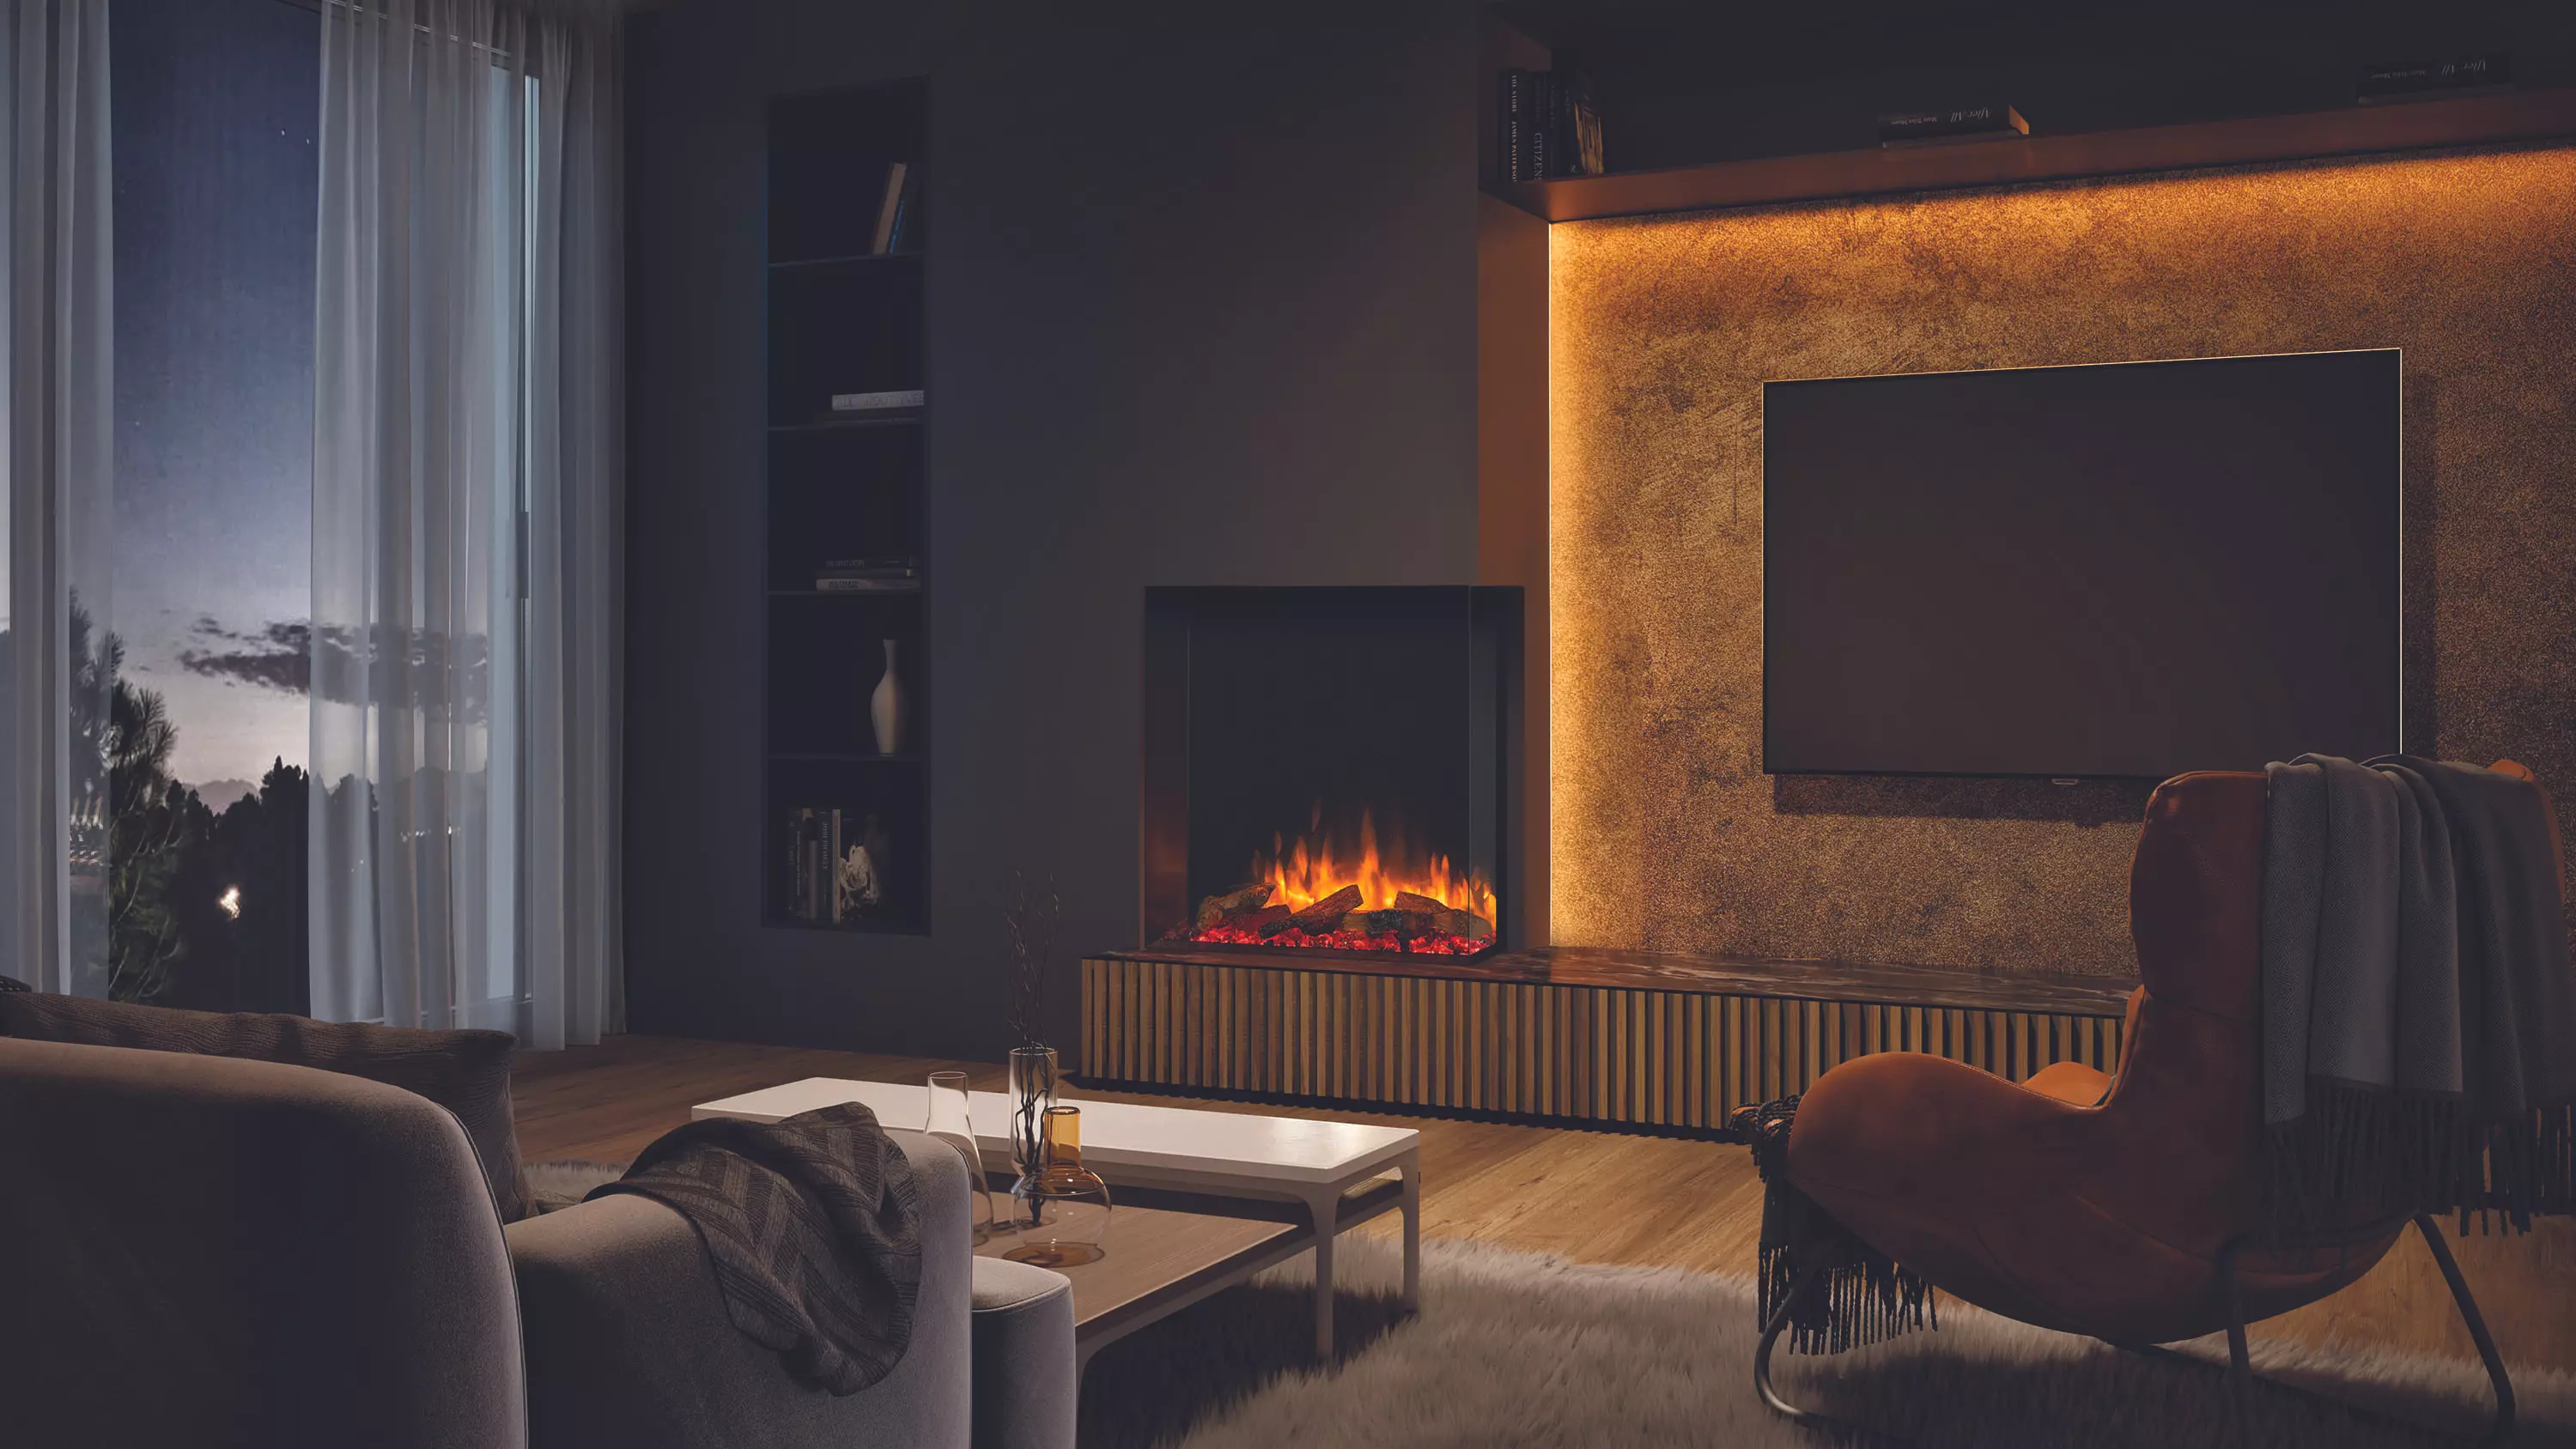 eReflex 75RW with Log Effect, installed as a two-sided fire shown with optional mood lighting system_ER7508.jpg